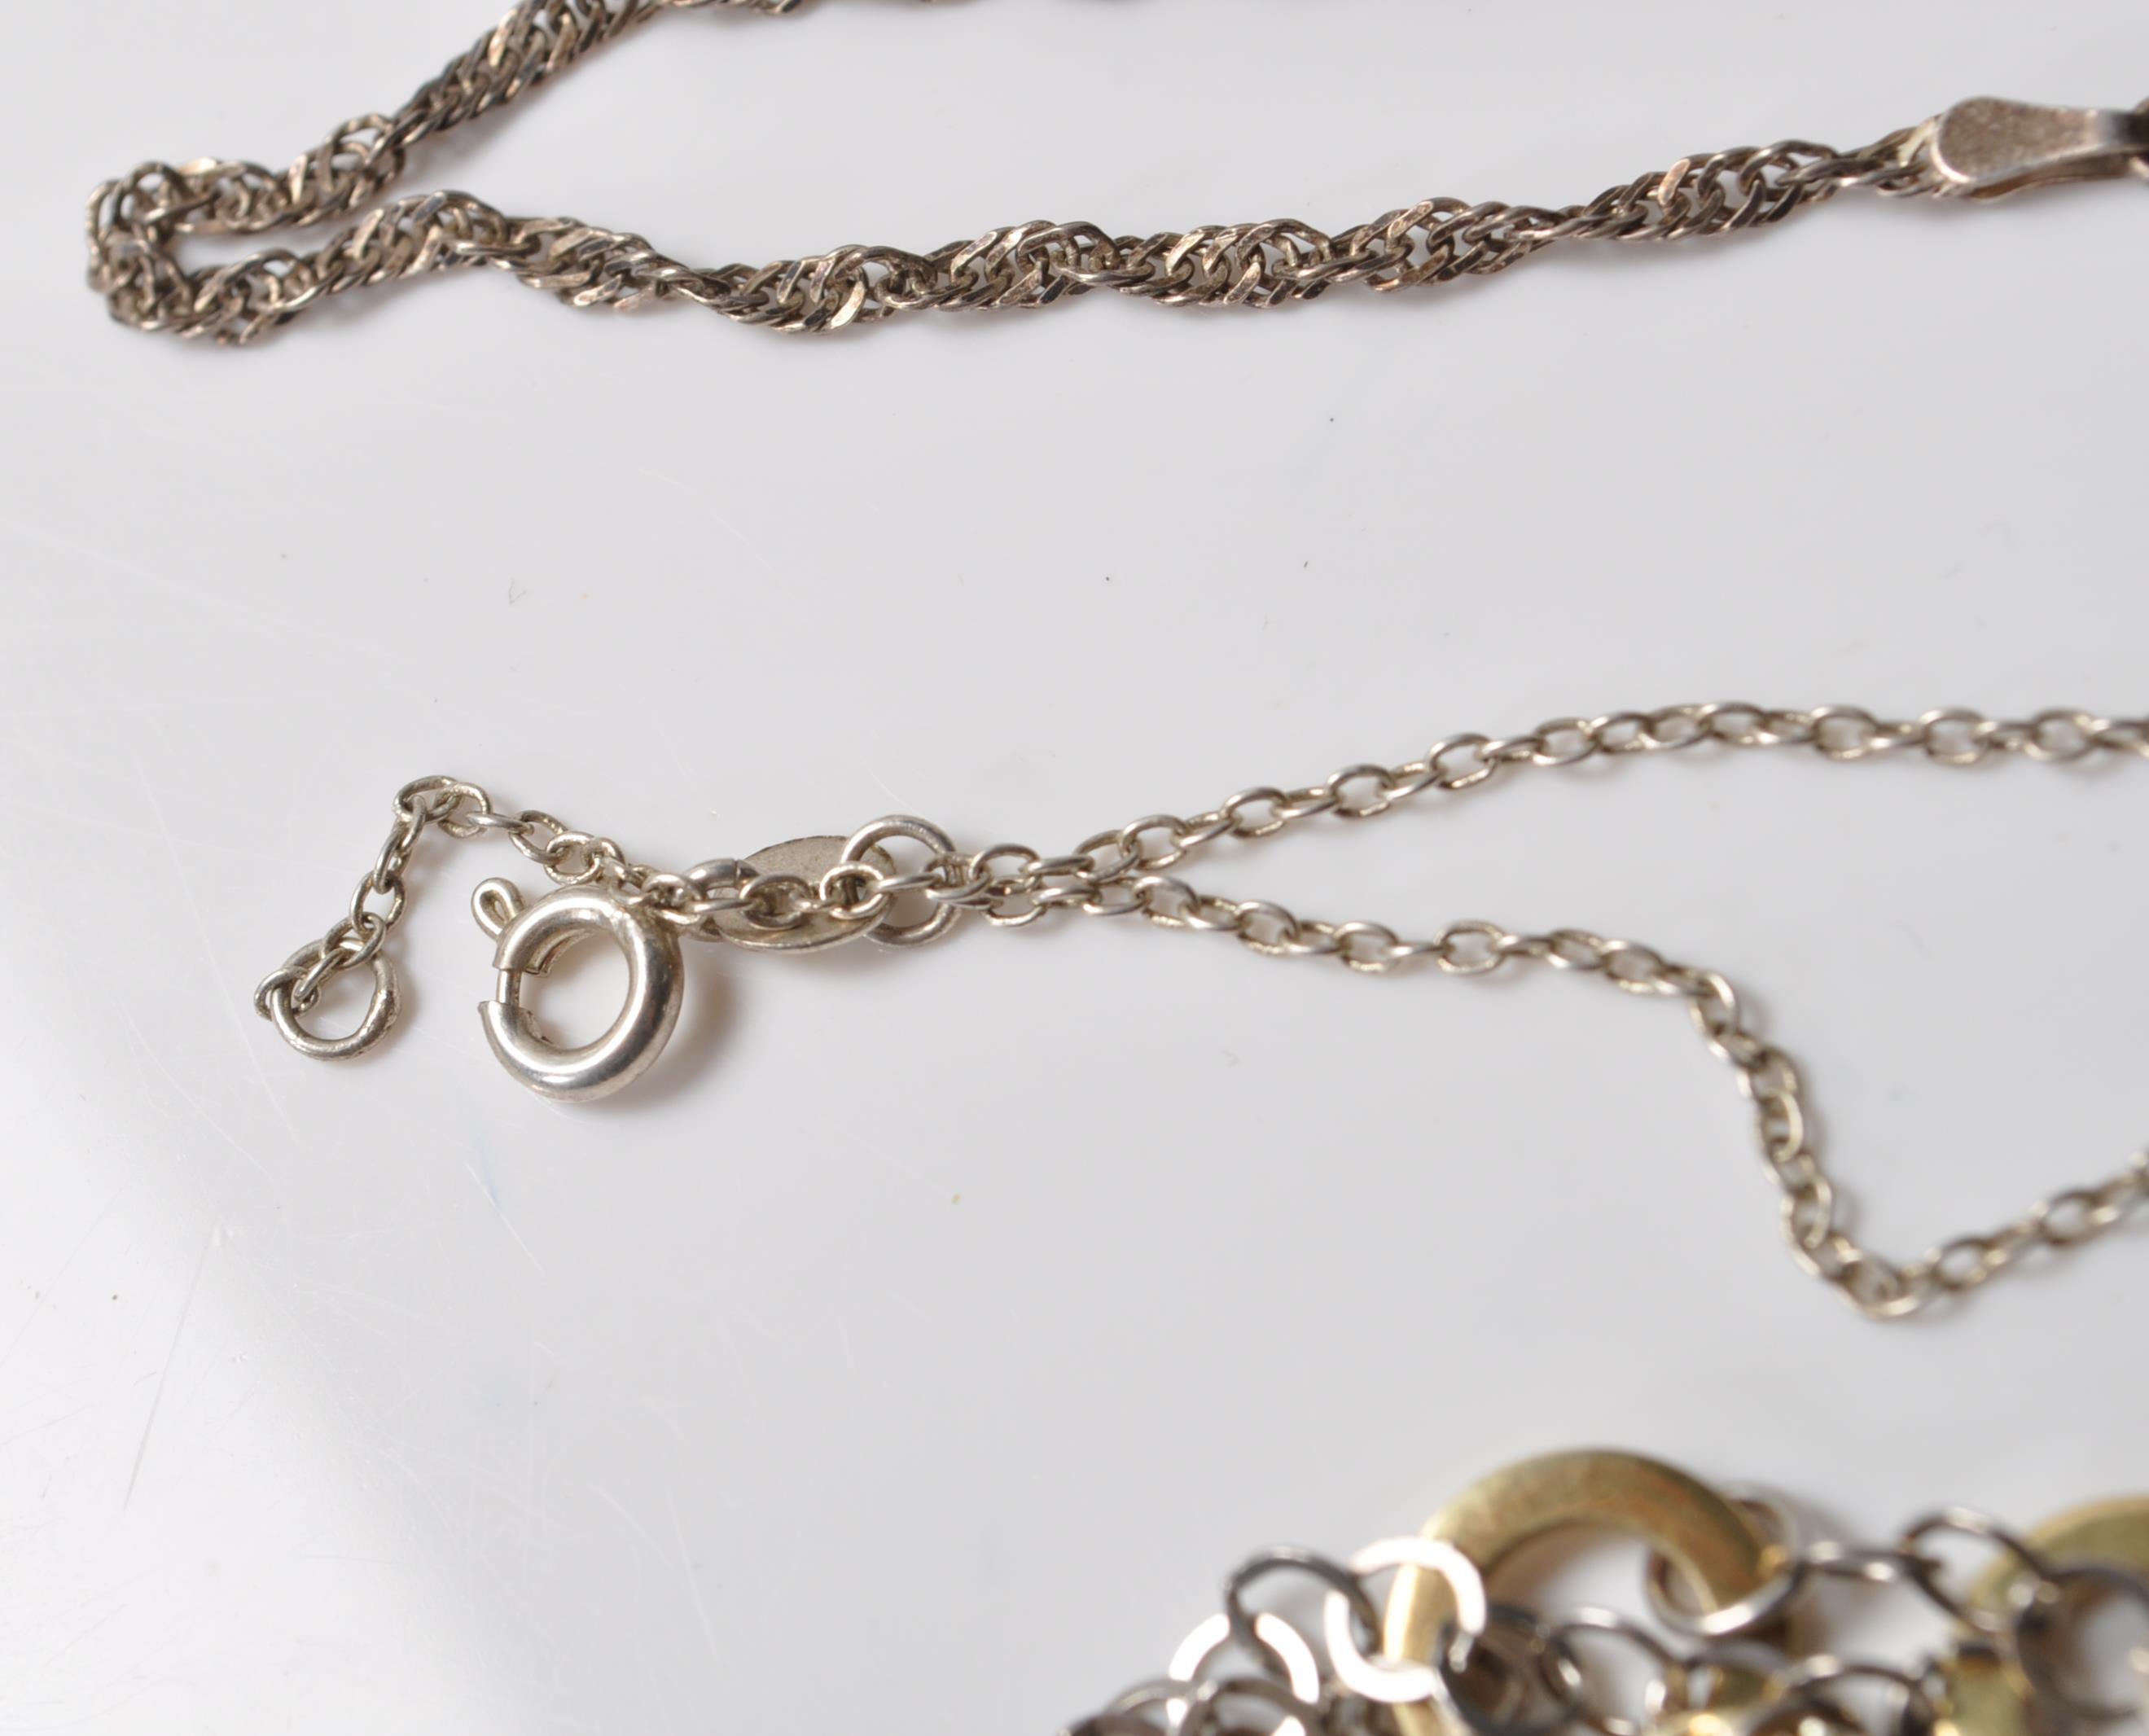 COLLECTION OF STAMPED 925 SILVER CHAIN NECKLACES AND PENDANTS. - Image 3 of 12